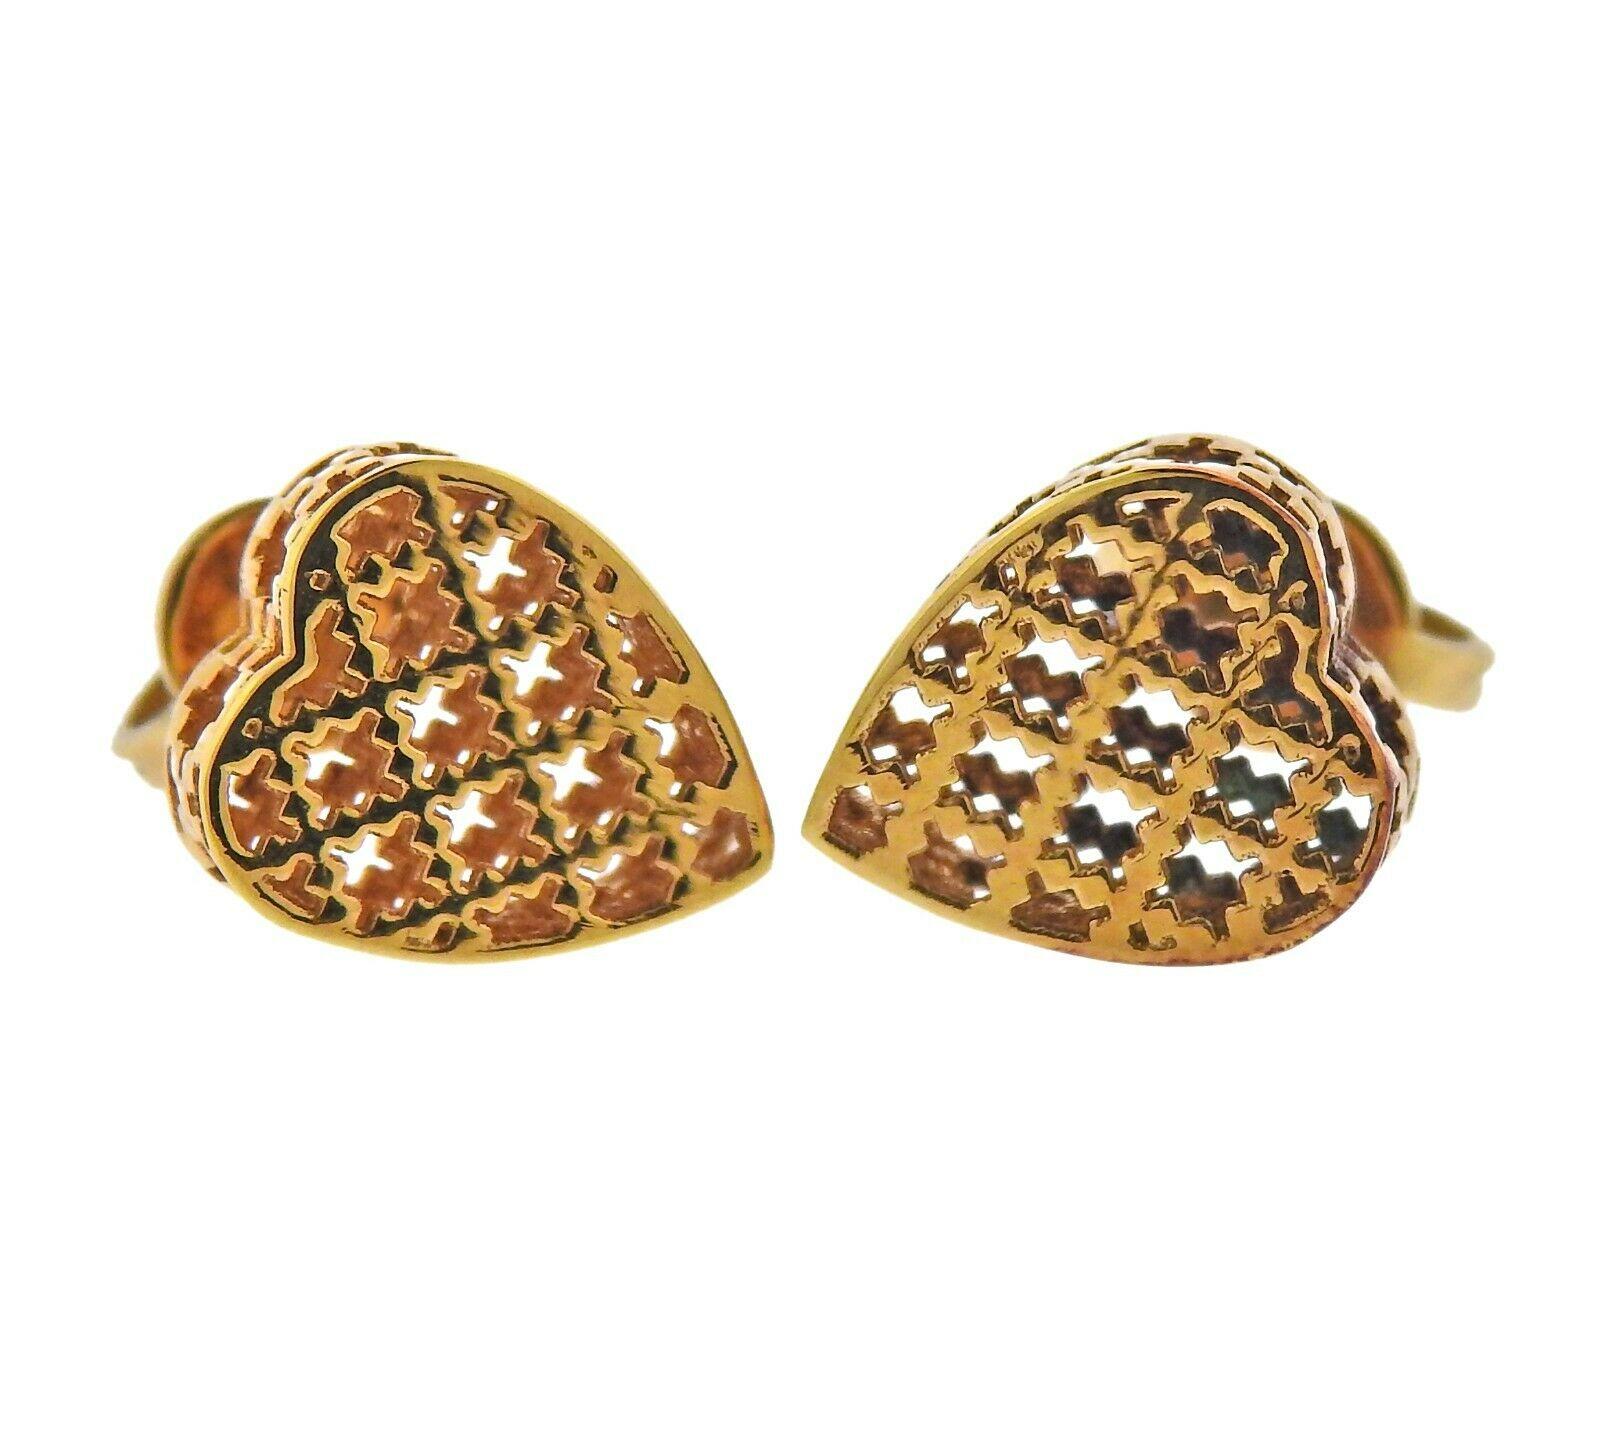 Pair of 18k yellow gold new Gucci Diamantissima heart earrings. Approx. retail $1690. Weight - 2.5 grams. Marked:  Gucci, Italian mark, Au750. Earrings are 10mm x 8.7mm.